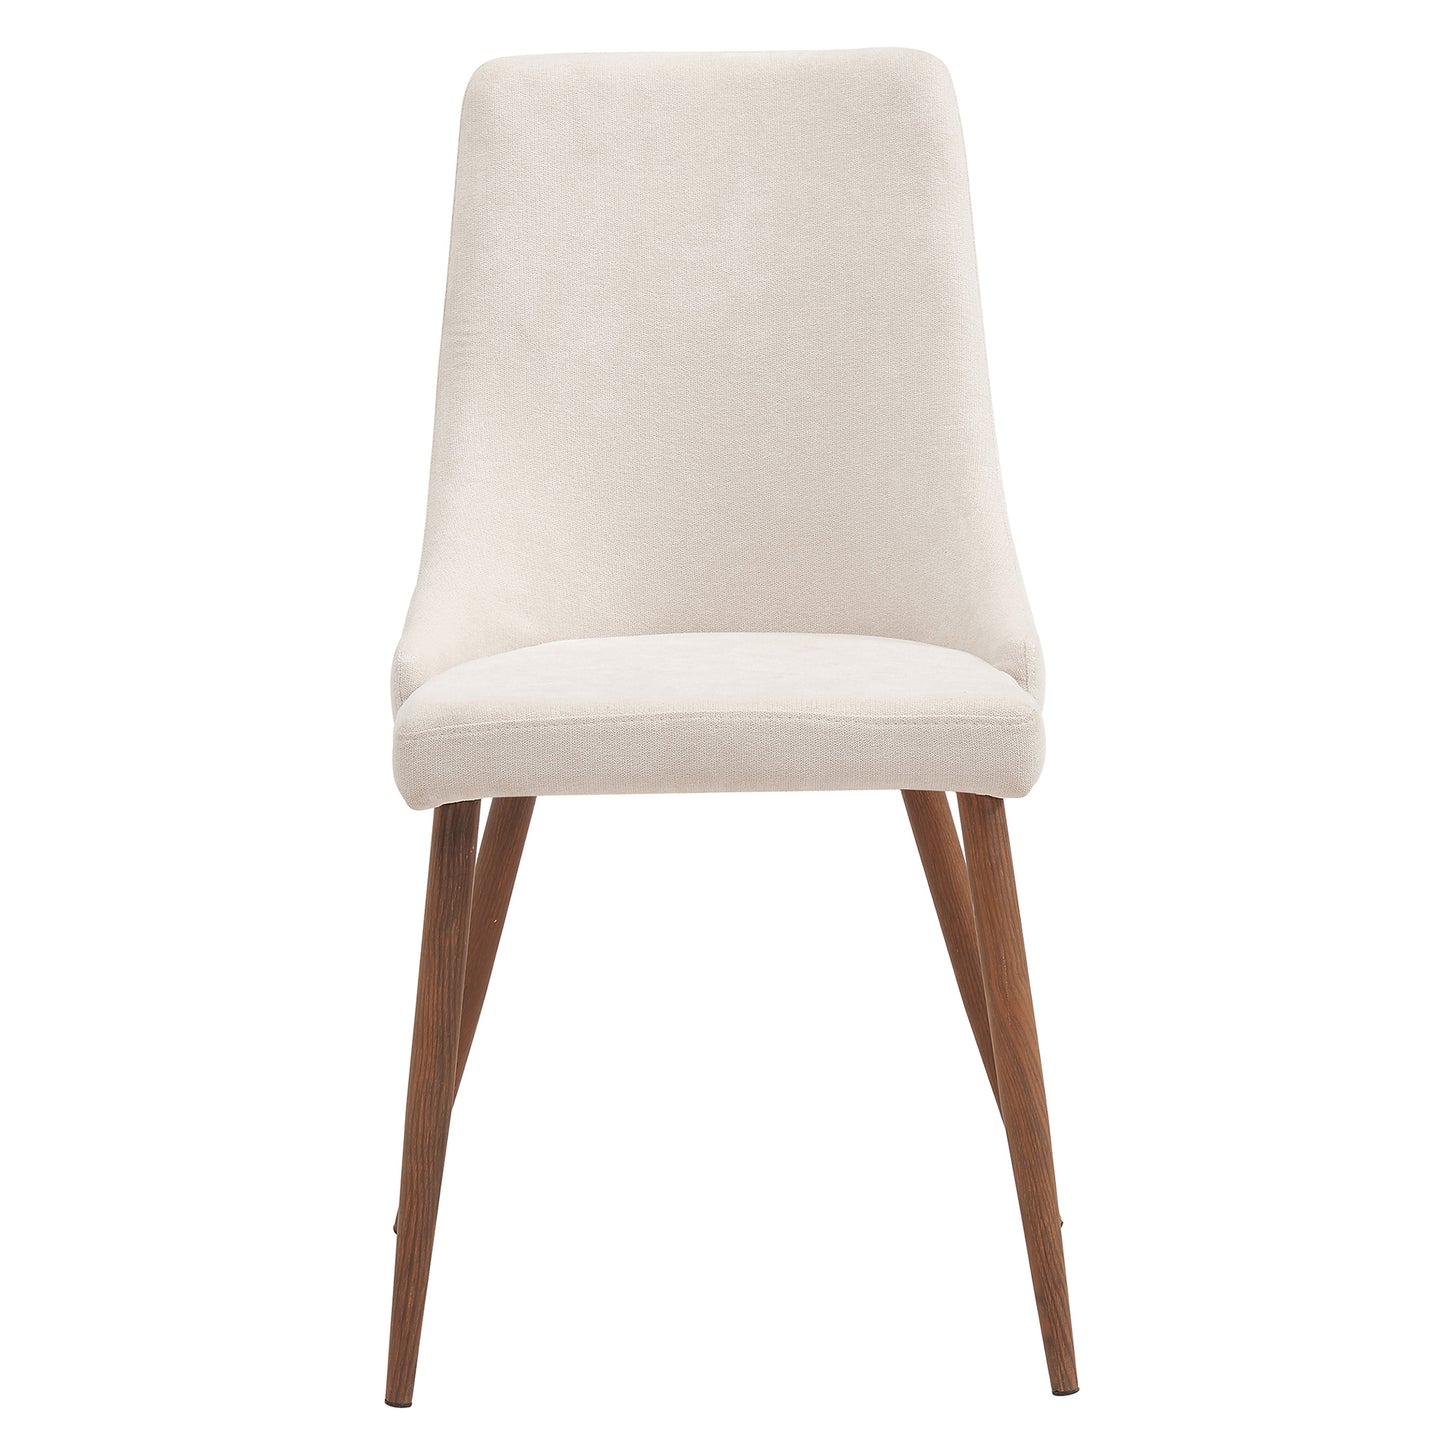 (CORA BEIGE- 2 pack)- FABRIC DINING CHAIRS